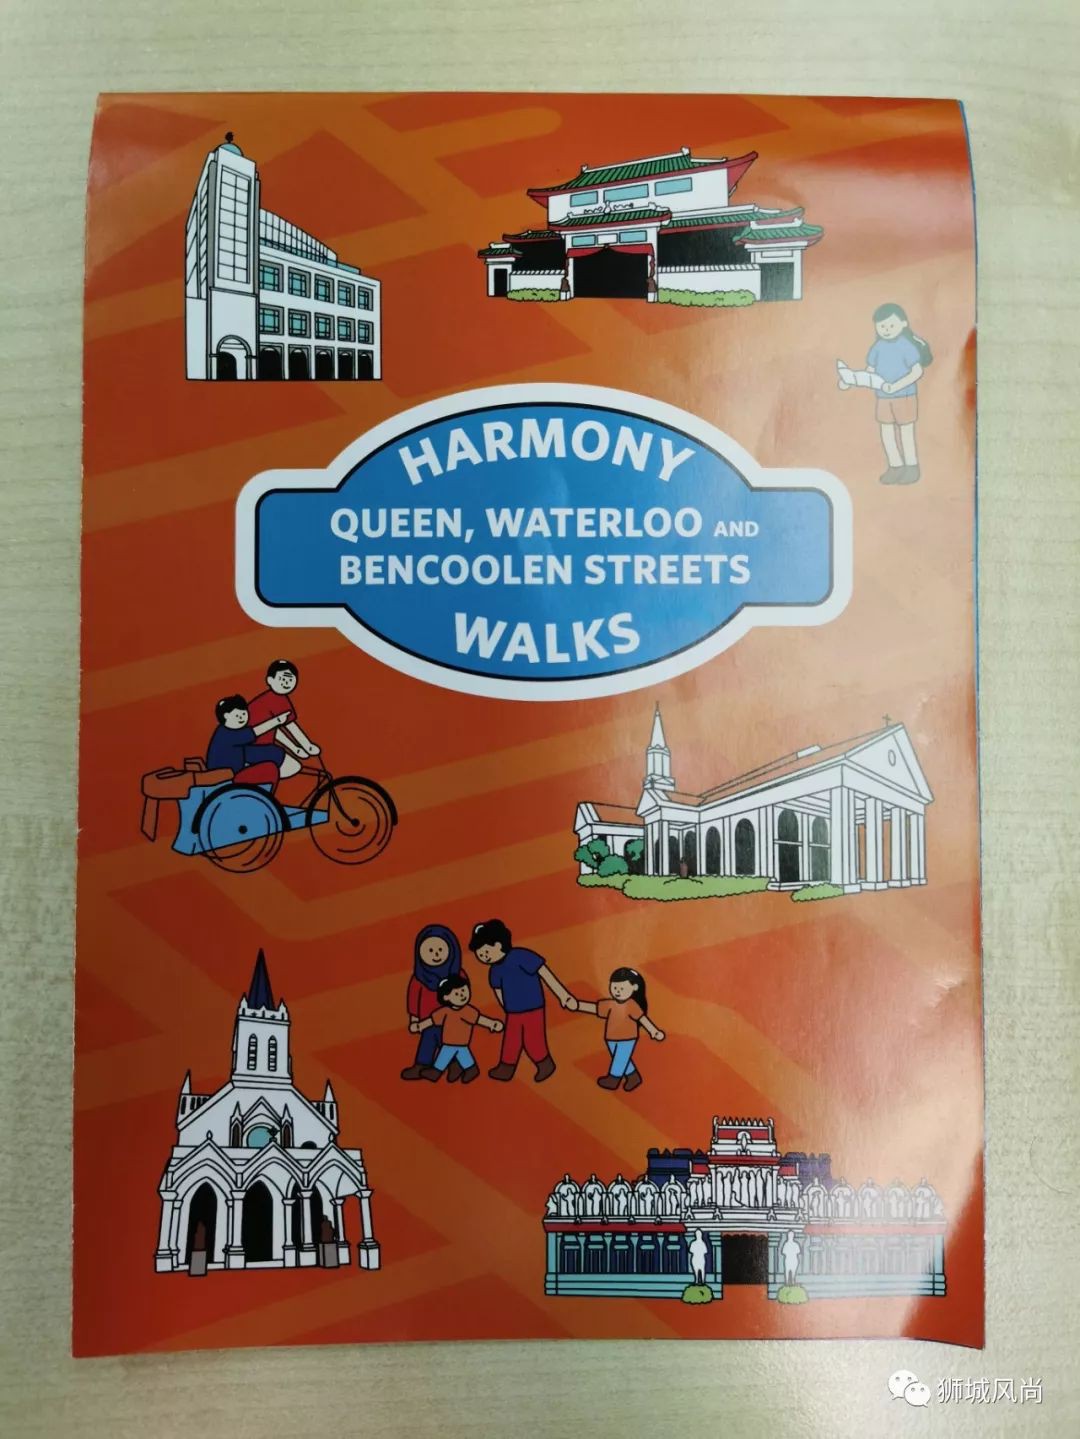 New guided walks launched to celebrate SG religious harmony